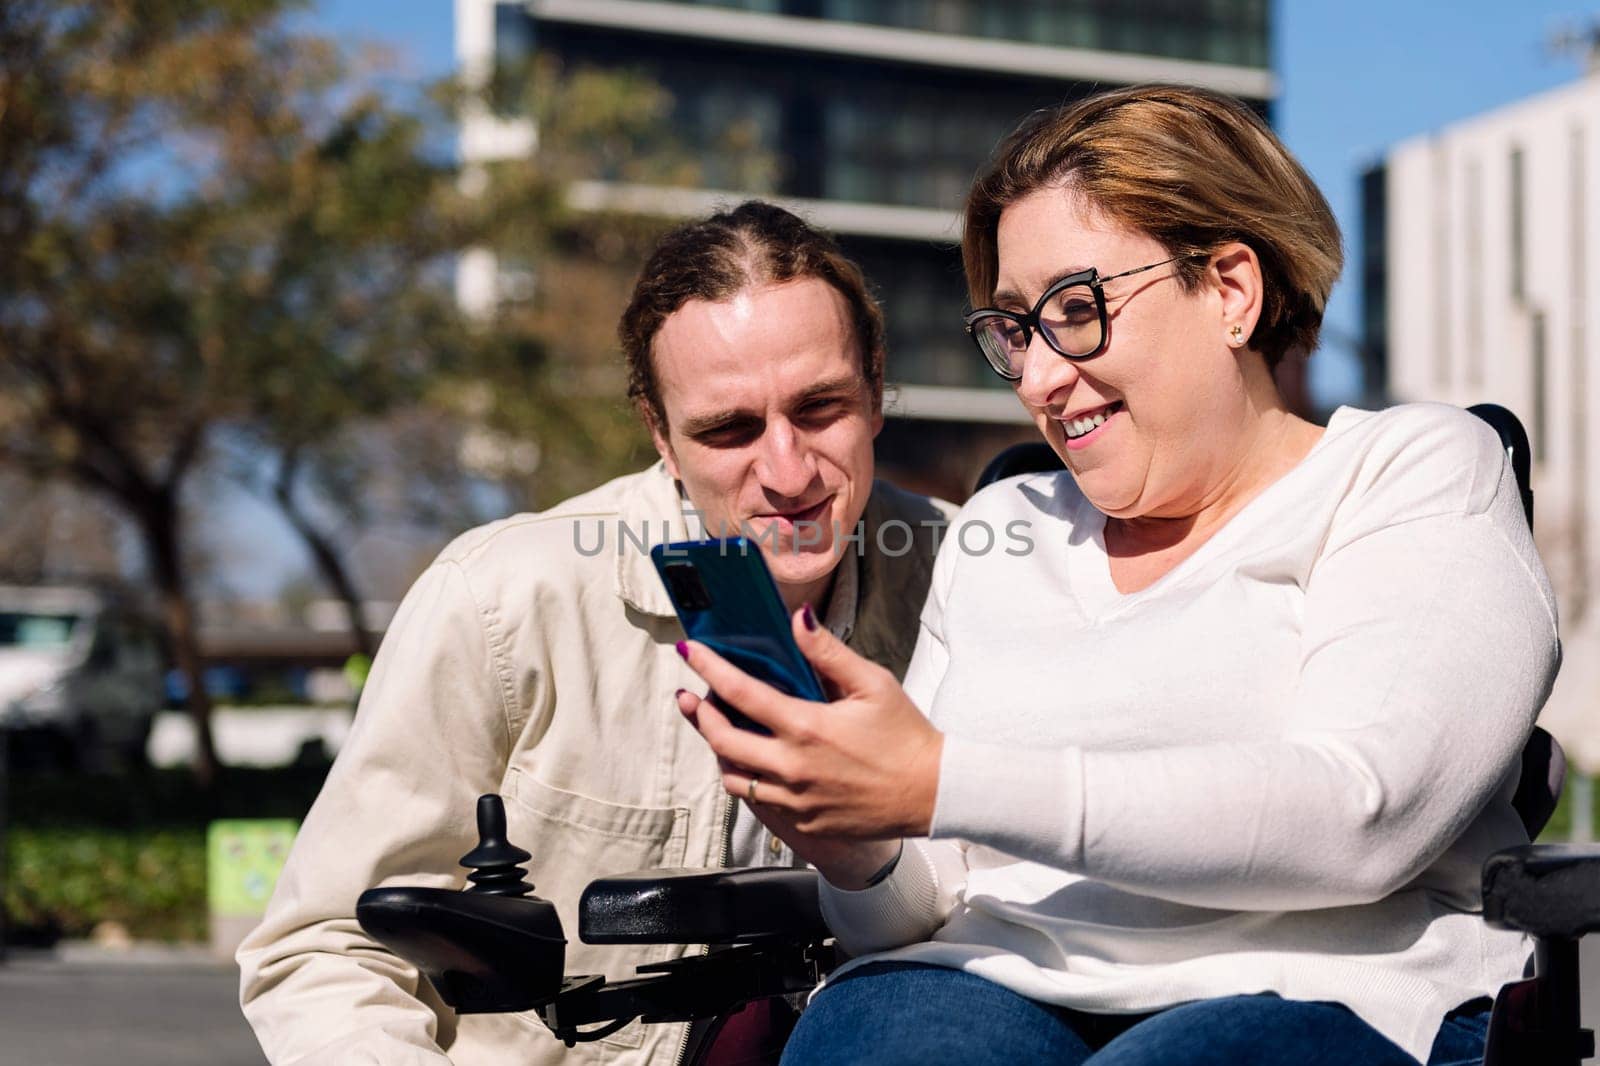 smiling woman using wheelchair showing mobile phone to a young male friend, concept of friendship and technology of communication